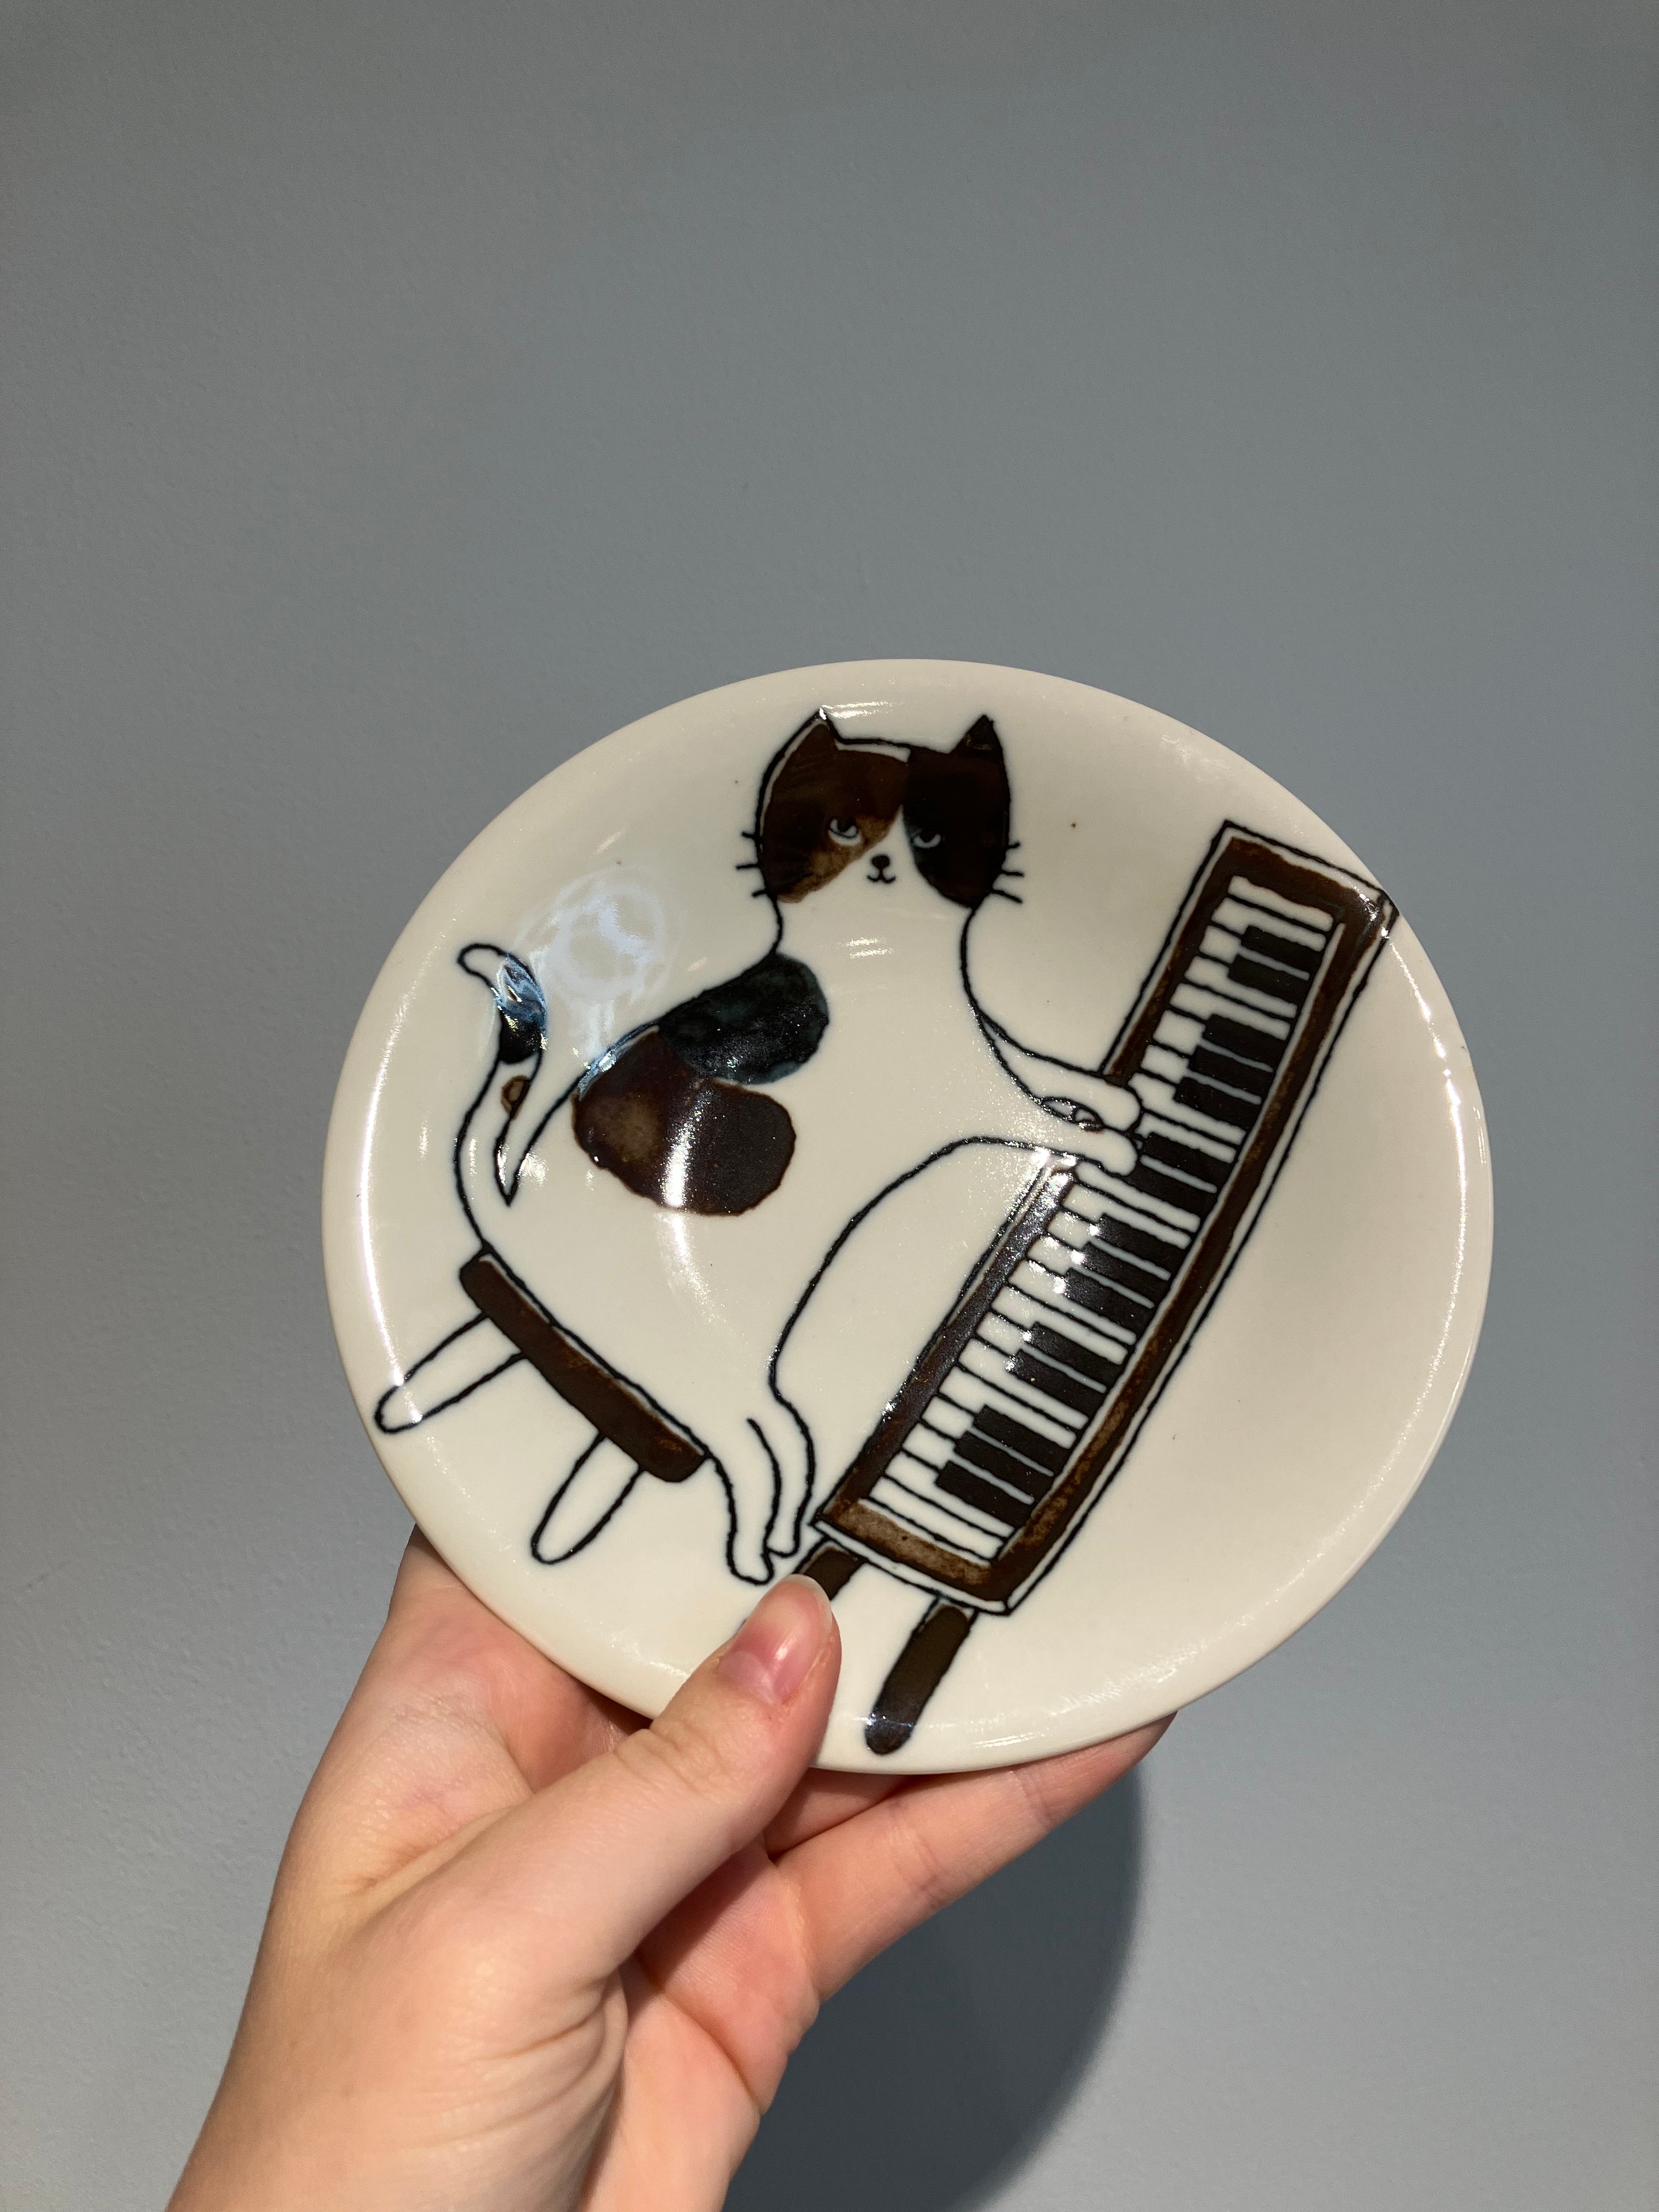 The plate with a cat playing the piano